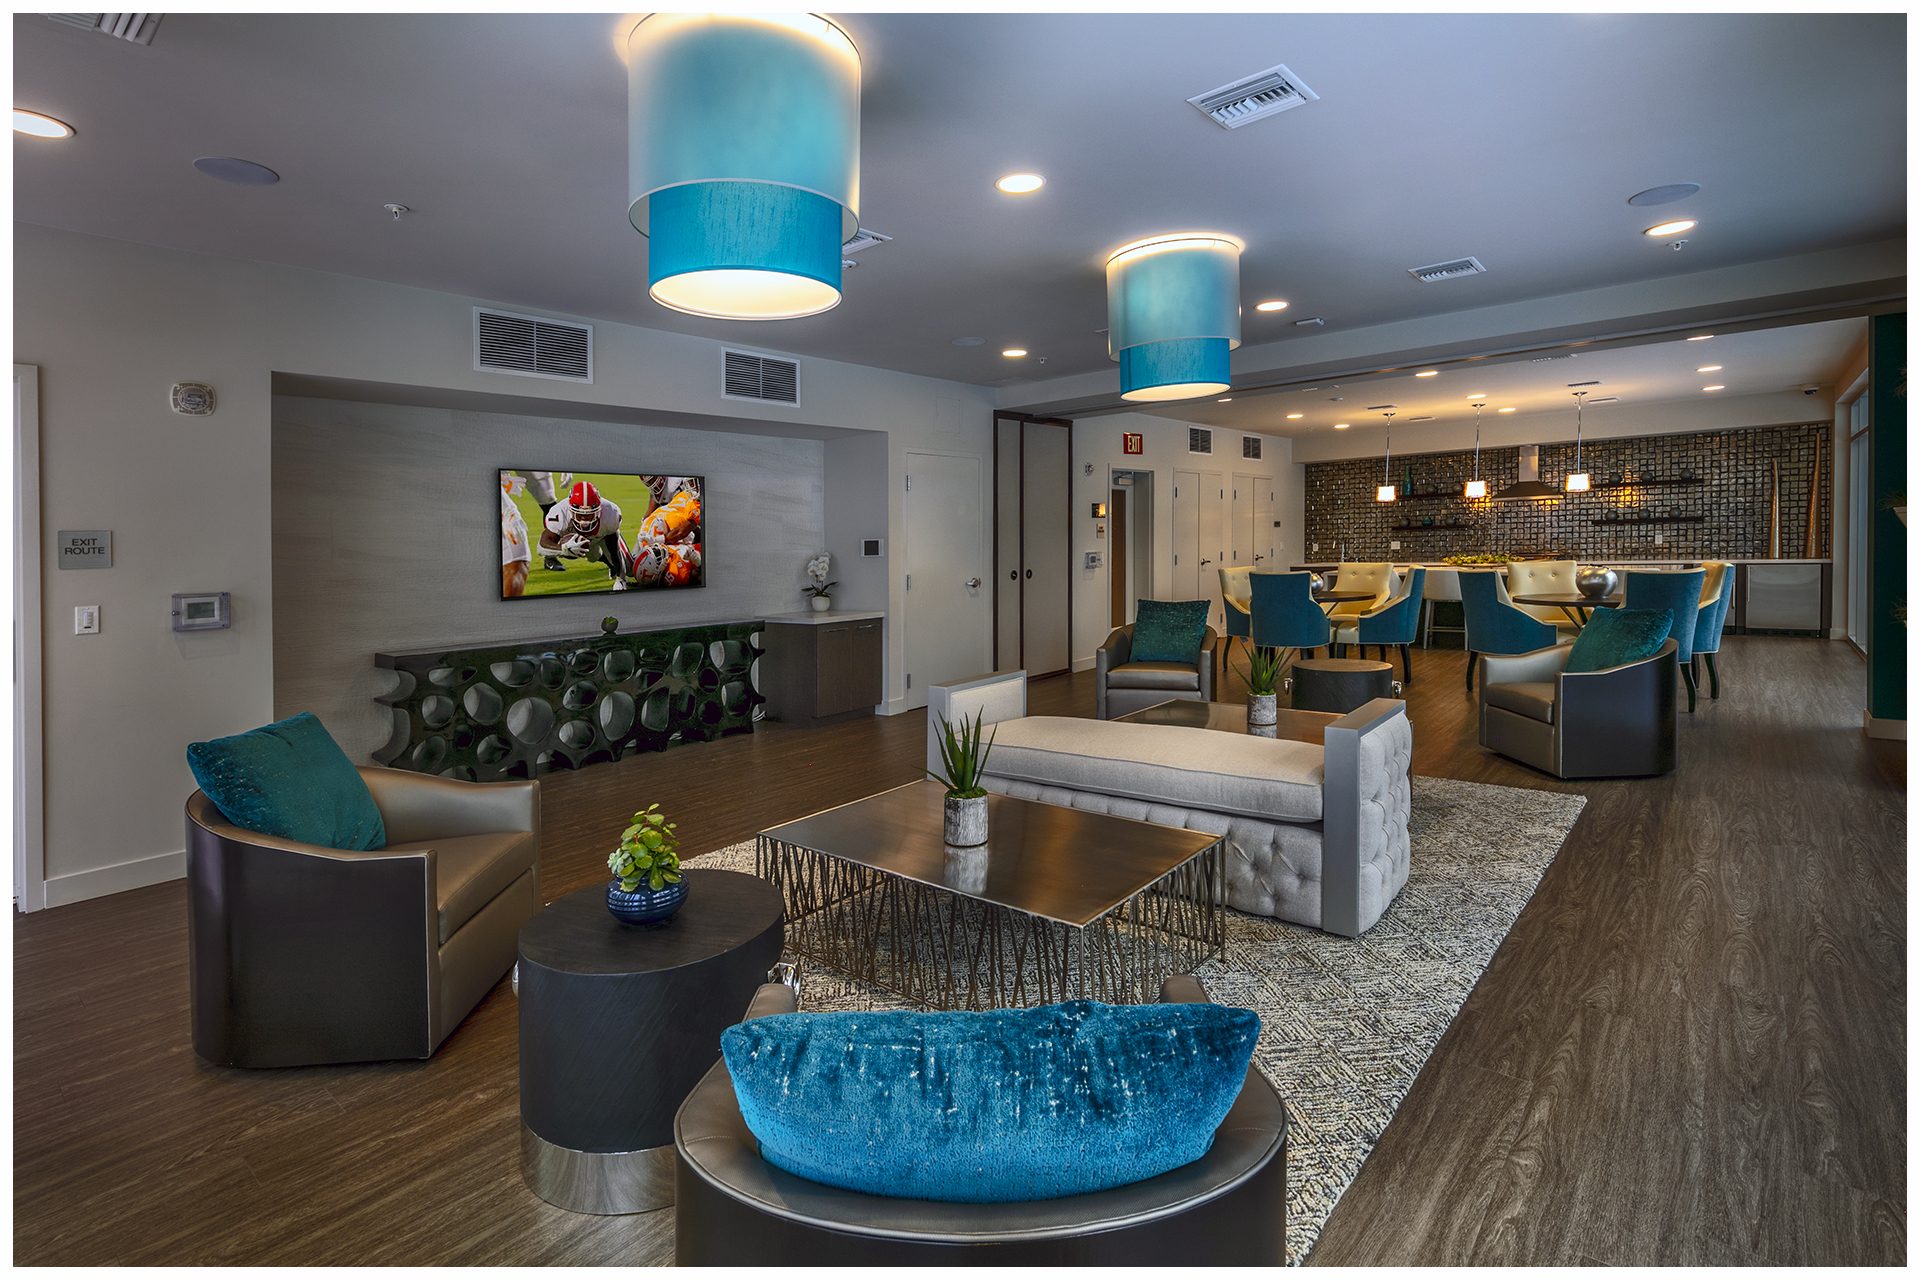 LOUNGE PROVISIONSBusiness Lounge or Game Lounge Audio Video Provisions & WiFi. Audio Video provisions are controlled via an in-room wall-mounted iPad and remotely from leasing office iPad. In-room iPad allows a limited range of volume change for music.